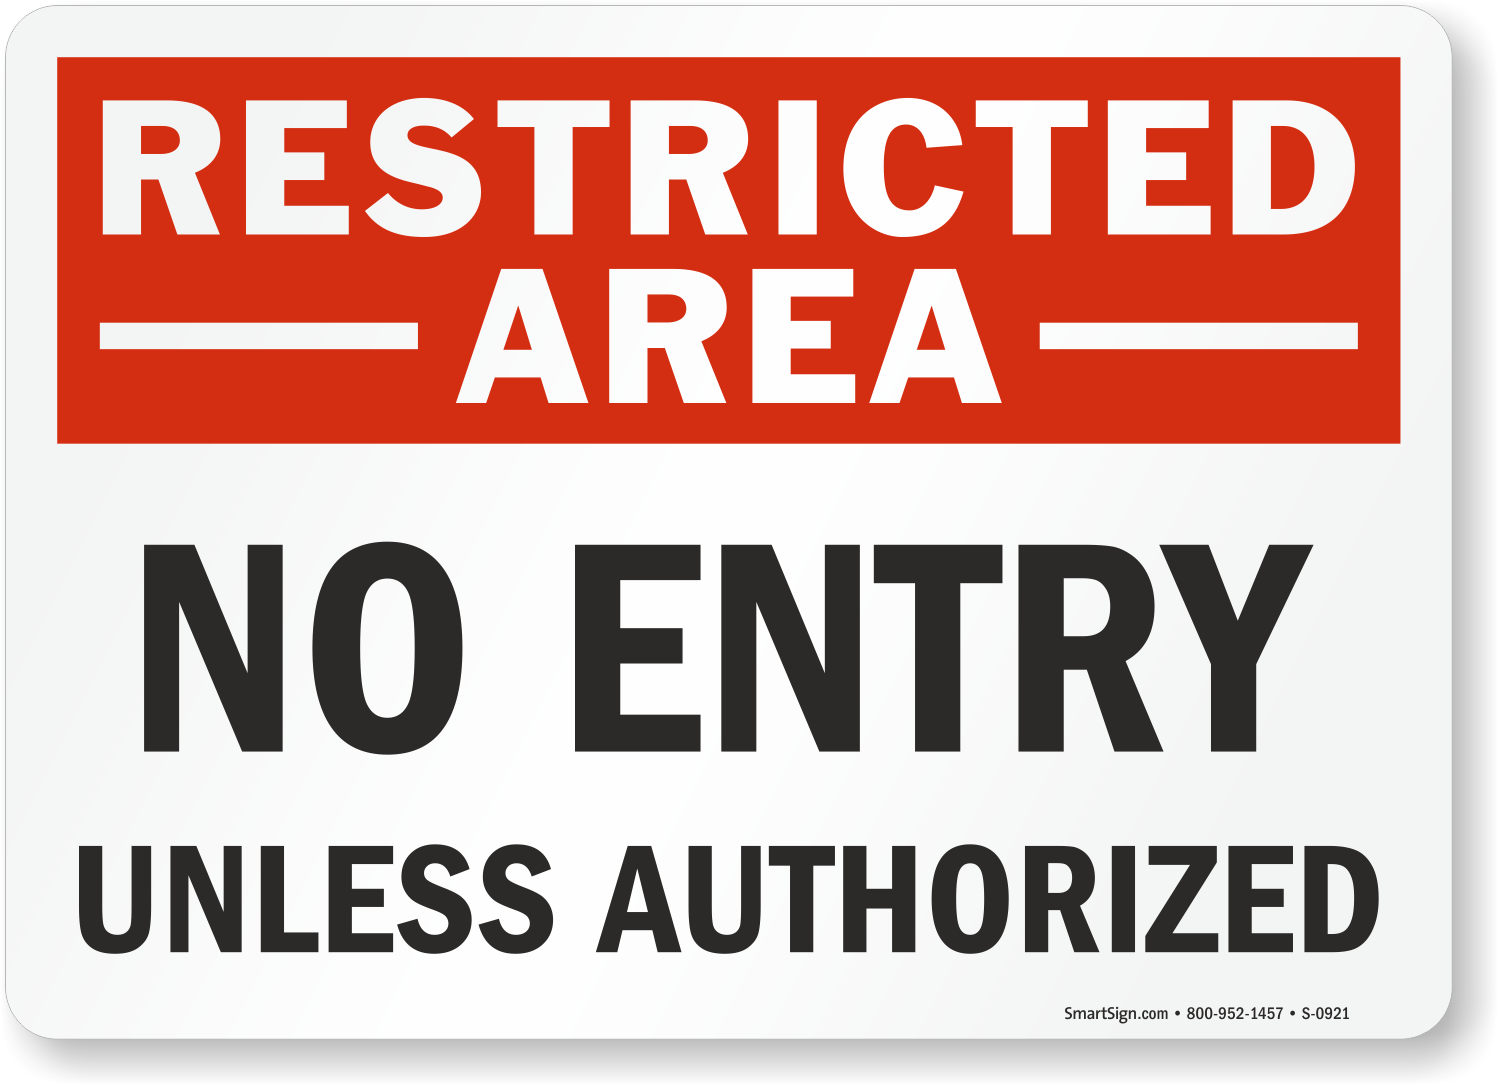 no-entry-unless-authorized-restricted-area-sign